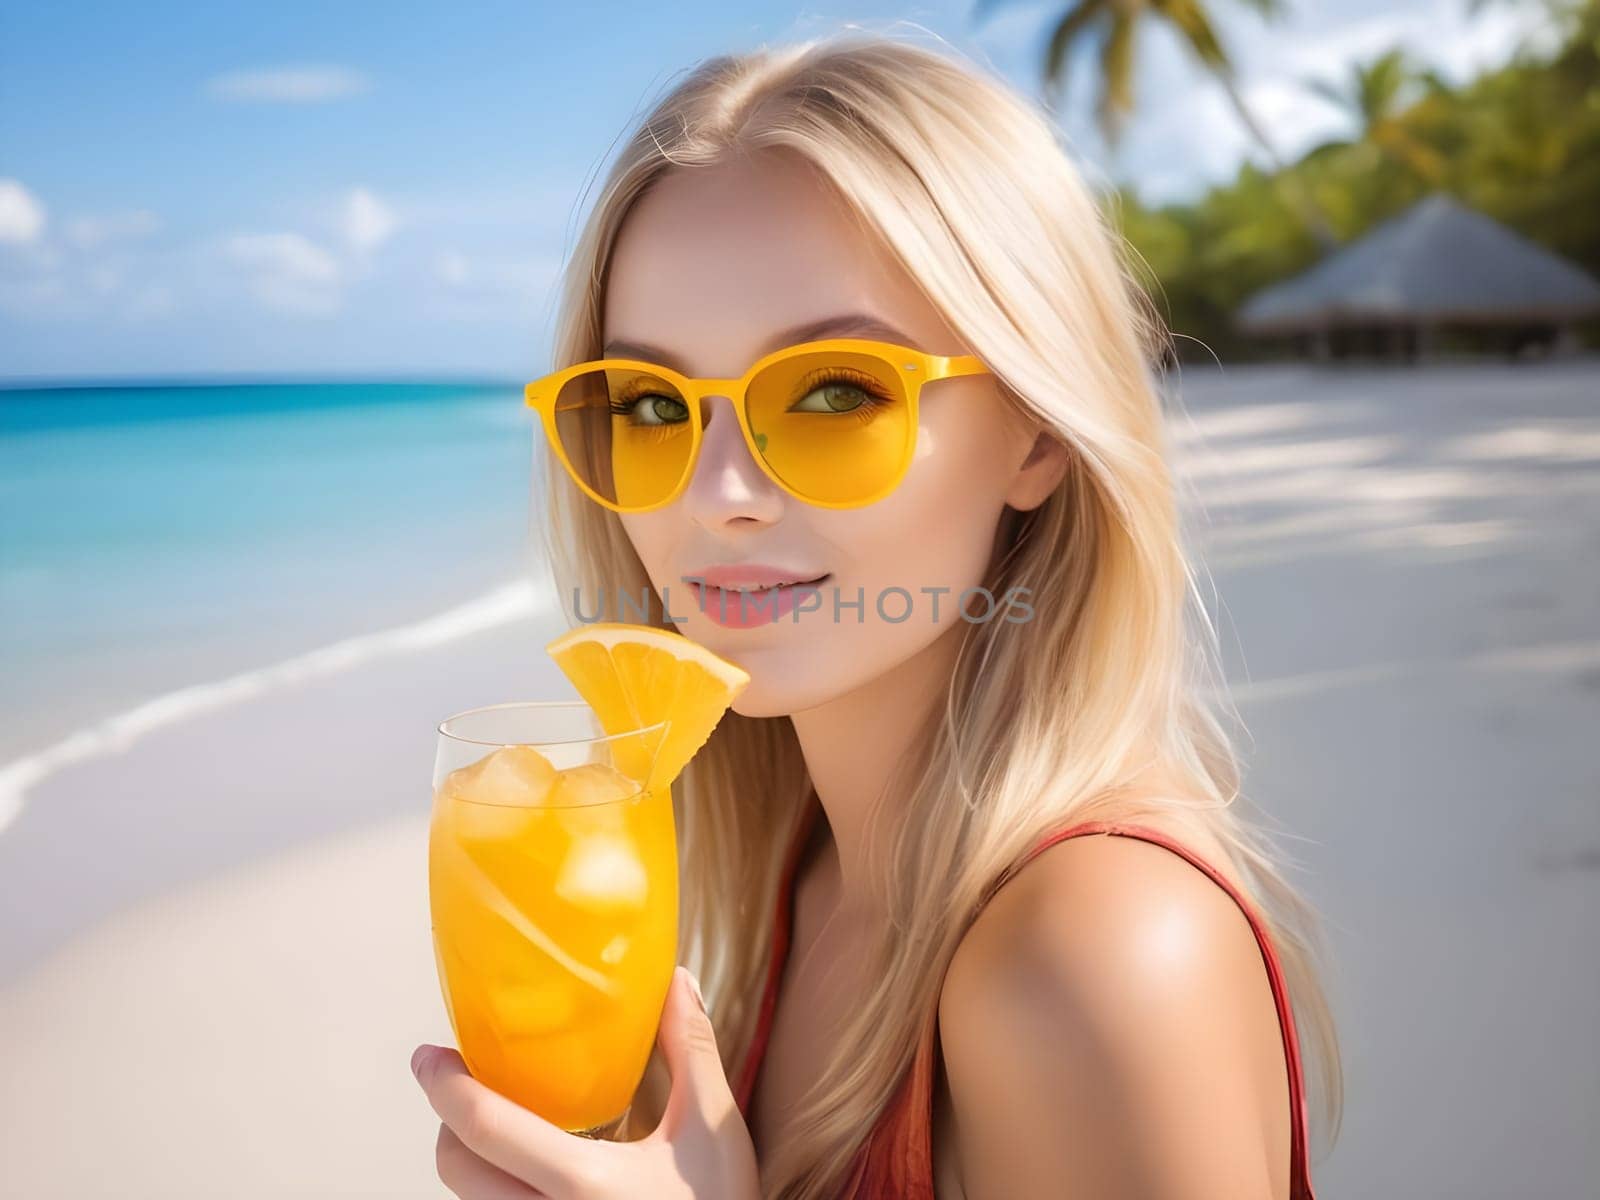 A happy woman is enjoying a glass of orange juice on the beach, gazing at the azure sky and water through her sunglasses.